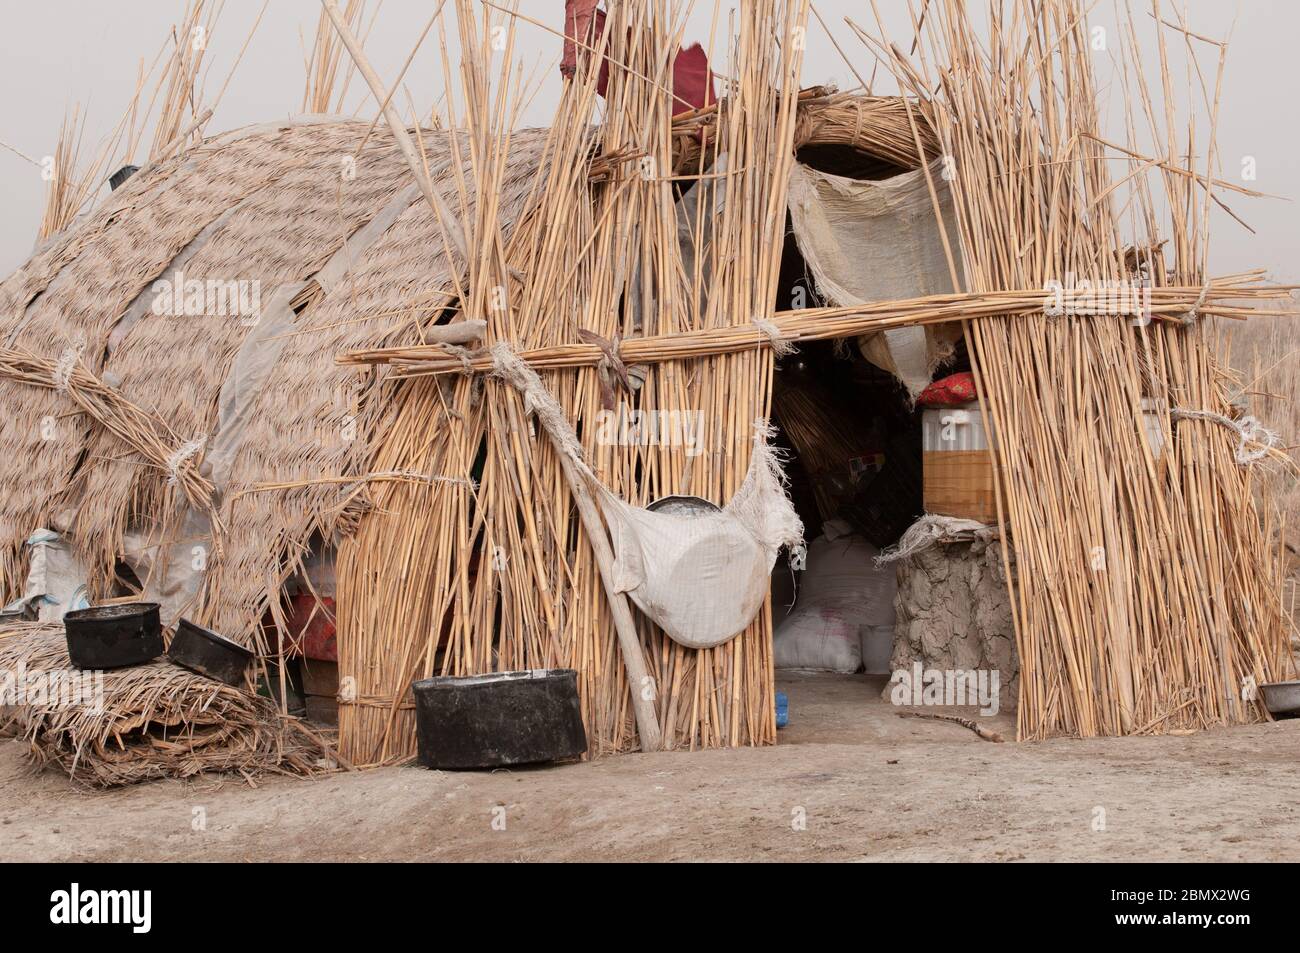 traditional buildings made from dried reeds, in the marshes of Southern Iraq Stock Photo